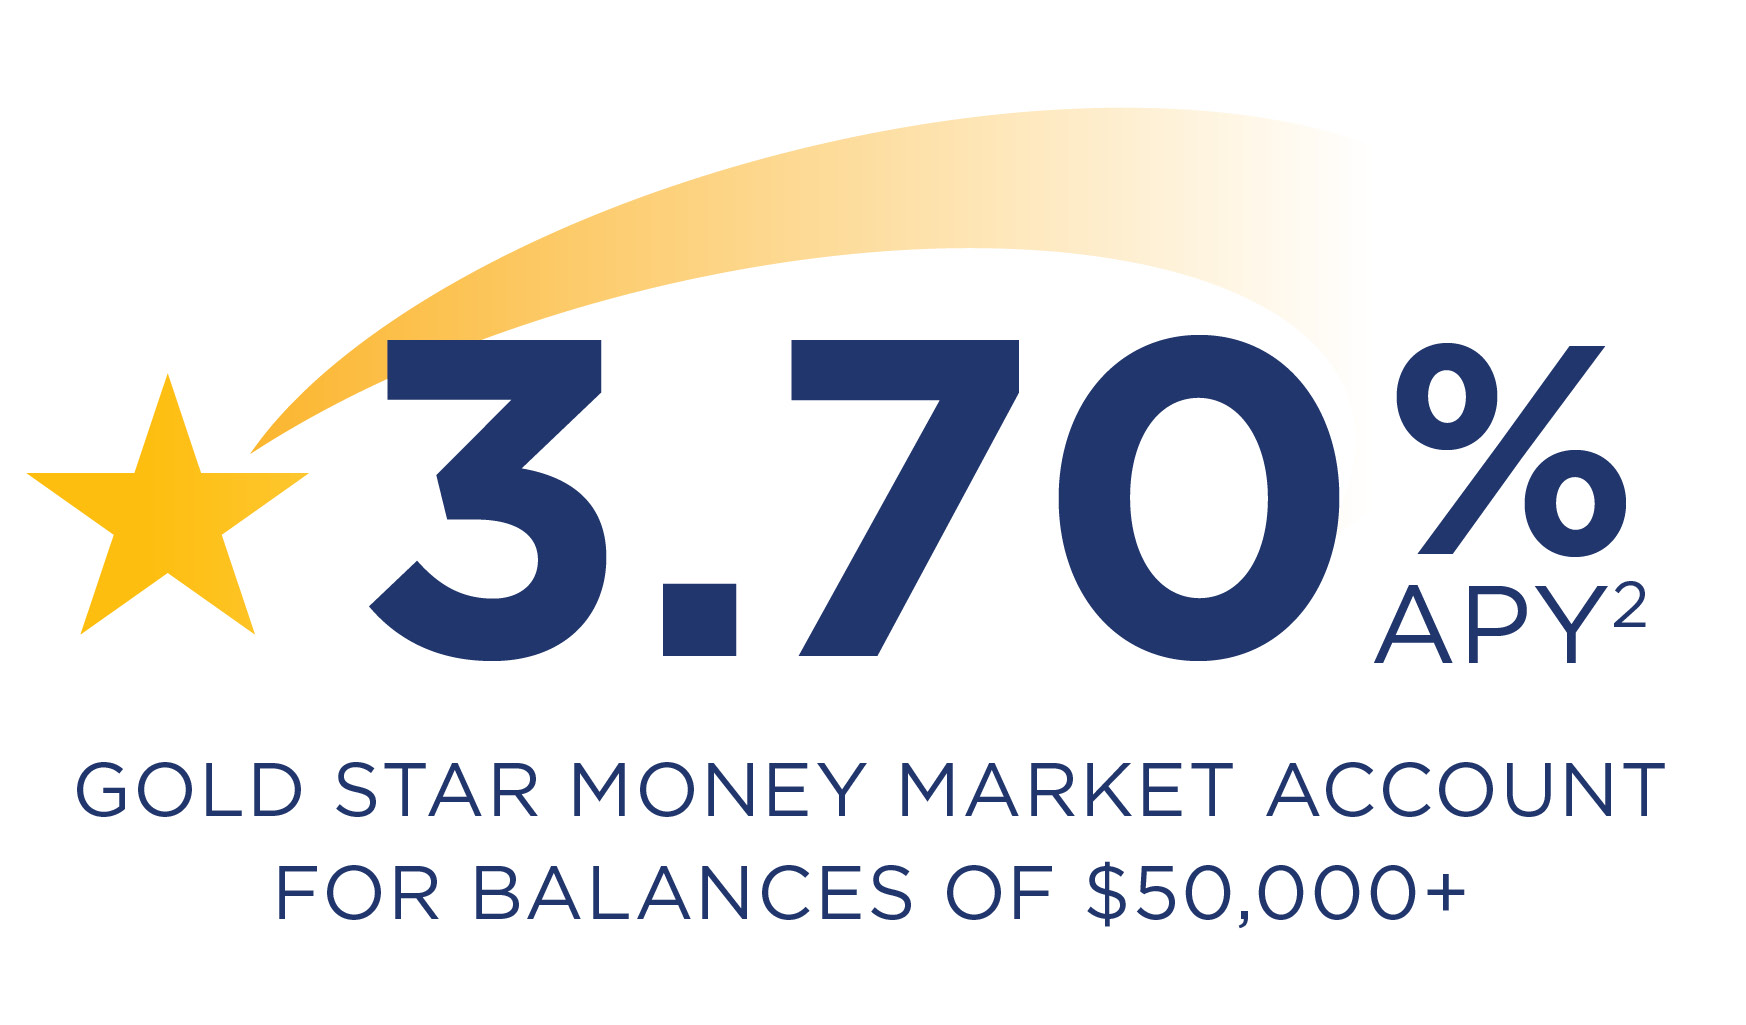 3.70% APY(2) for Gold Star Money Market Account Balances of $50,000 and greater